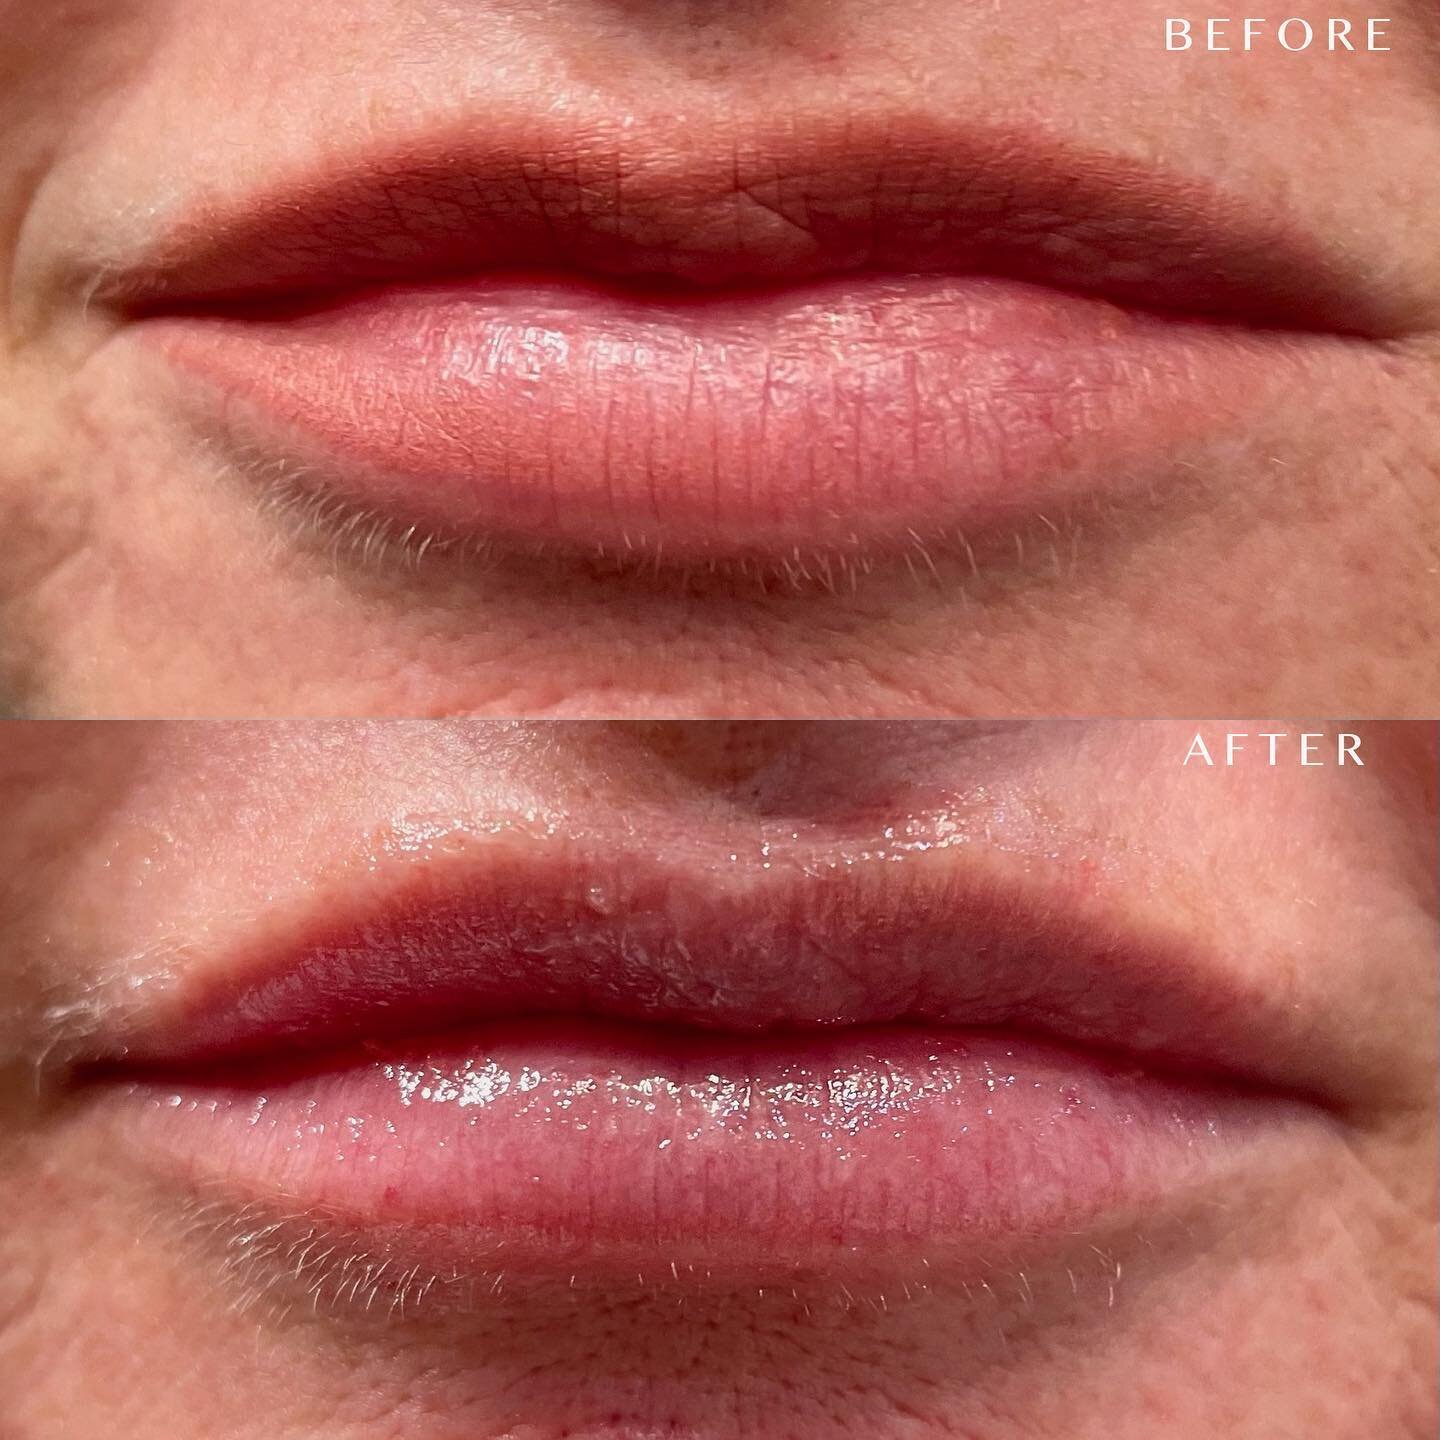 This patient wanted a subtle lip, I used Kysse 💋

Lips done by @babyfacellc.barbara

#lips #lipfiller #lipinjections #lipbeforeandafter #subtlelips #scottsdalebotox #scottsdaleinjector #azmedspa #booknow #linkinbio